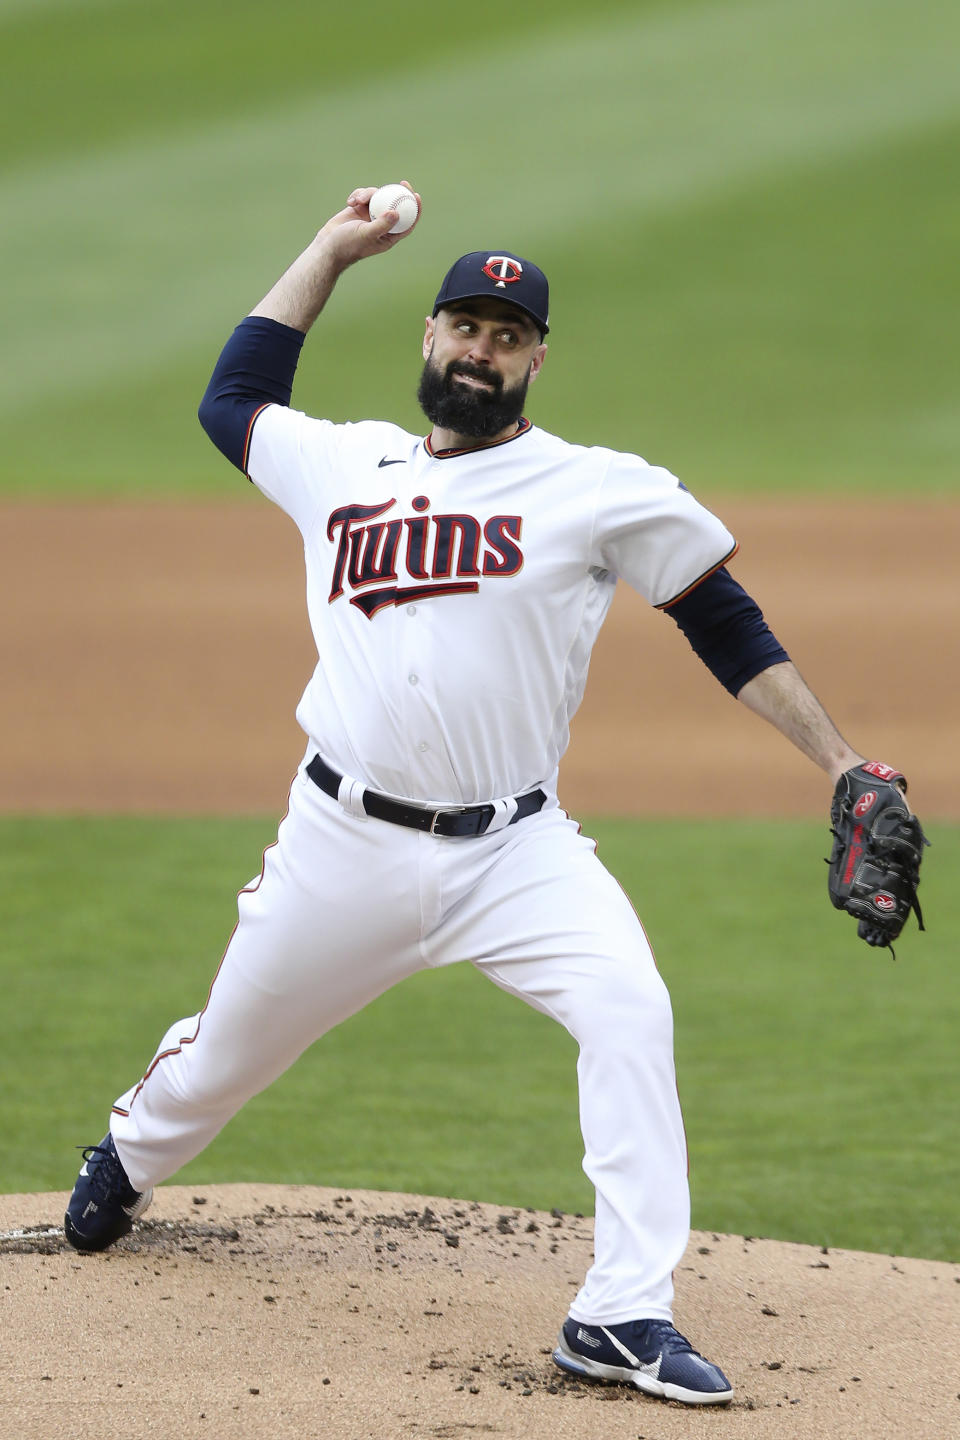 Minnesota Twins' pitcher Matt Shoemaker throws against the Kansas City Royals during the first inning of a baseball game, Sunday, May 30, 2021, in Minneapolis. (AP Photo/Stacy Bengs)